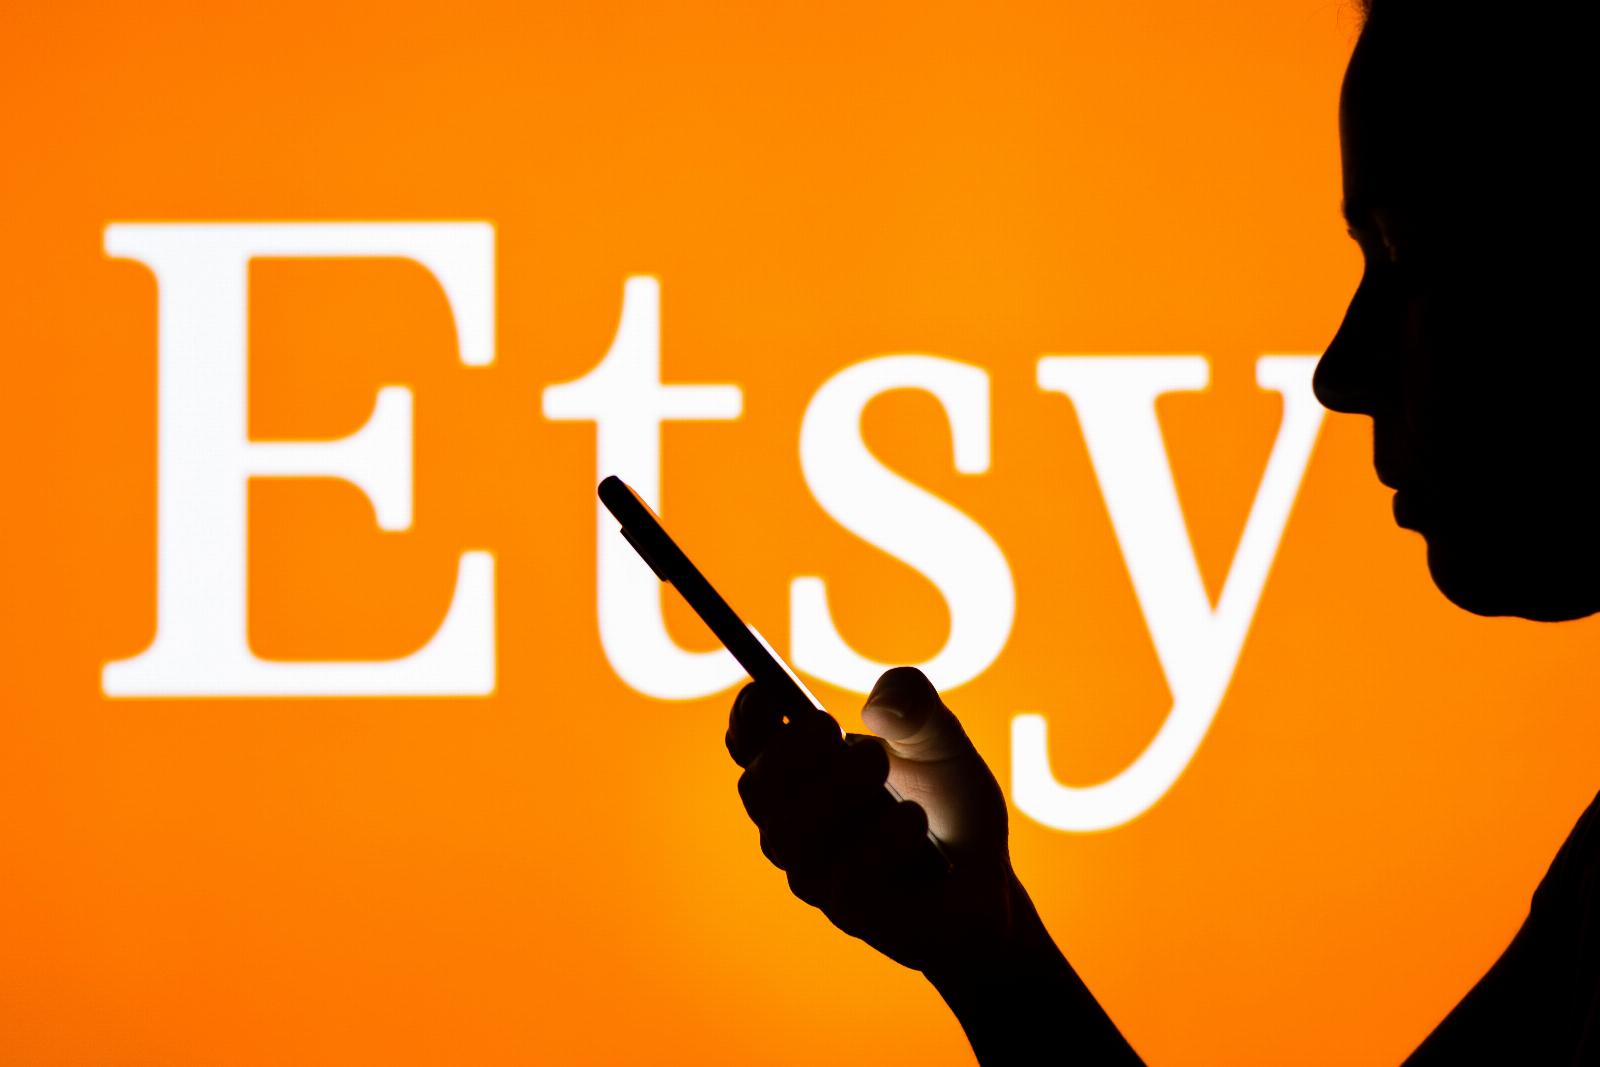 Etsy begins processing seller payments via alternative partners after delays caused by SVB implosion